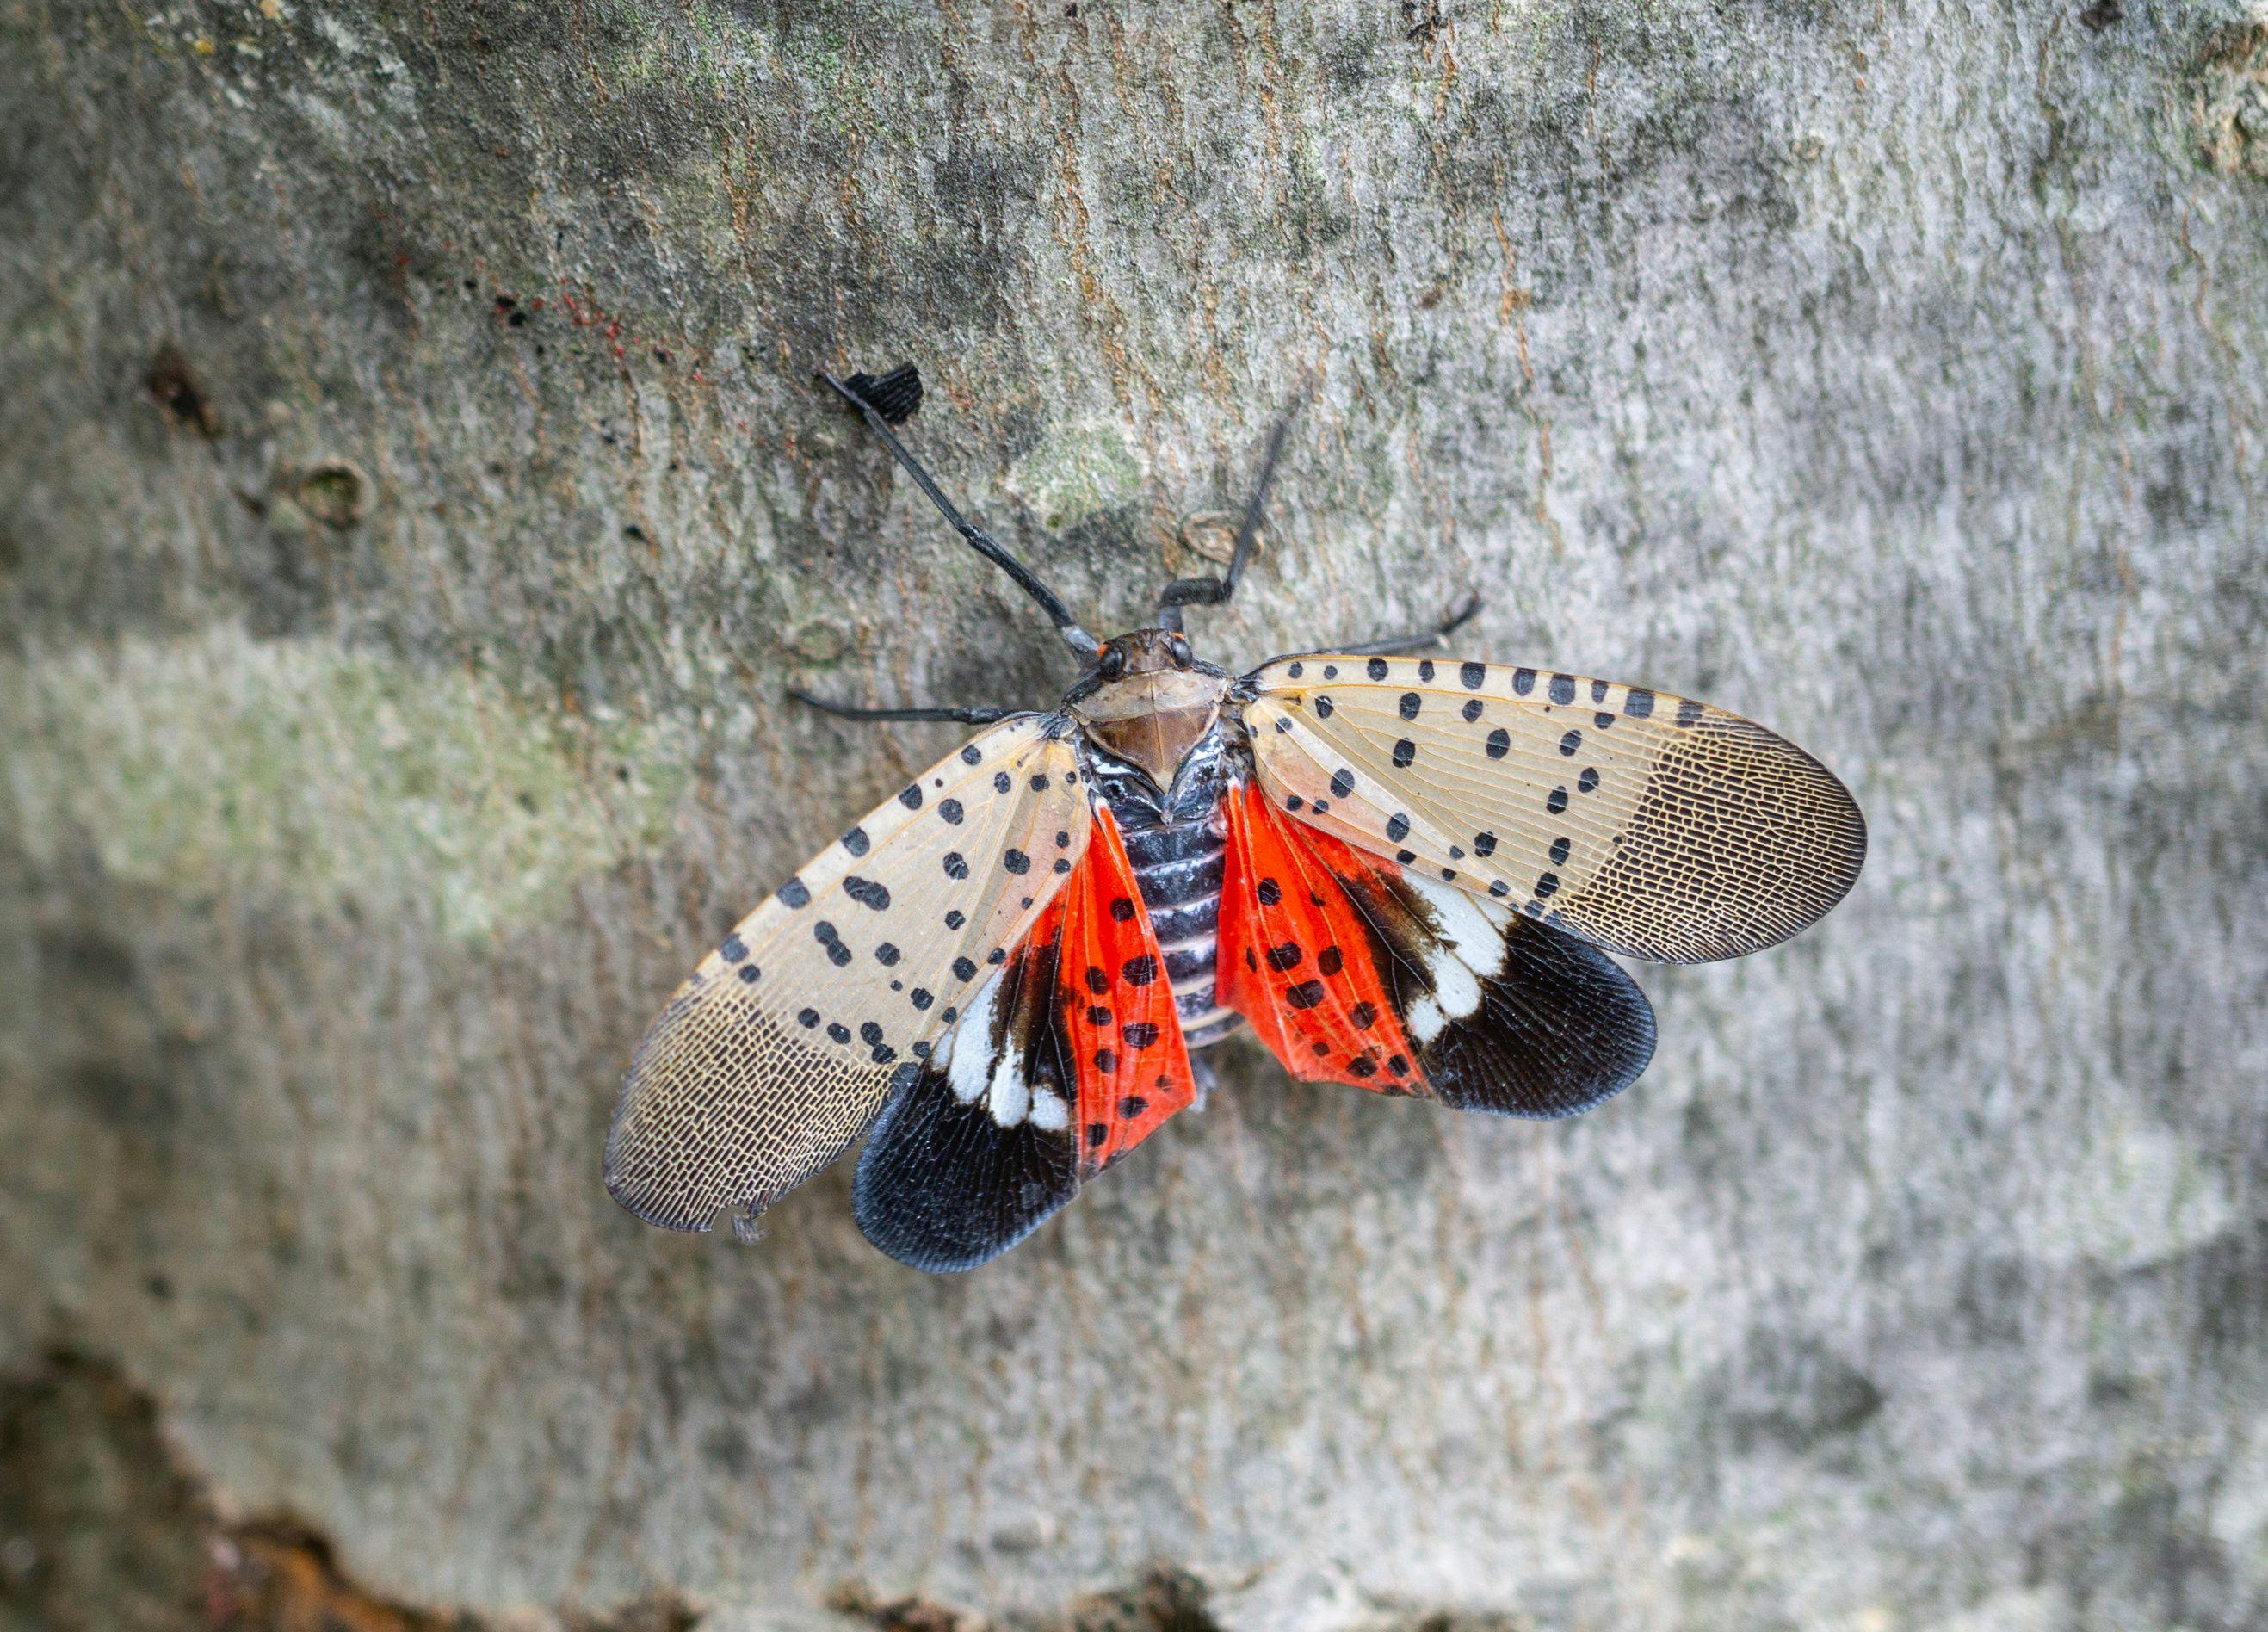 Dogs: Doing their part to help stop the spotted lanternfly spread